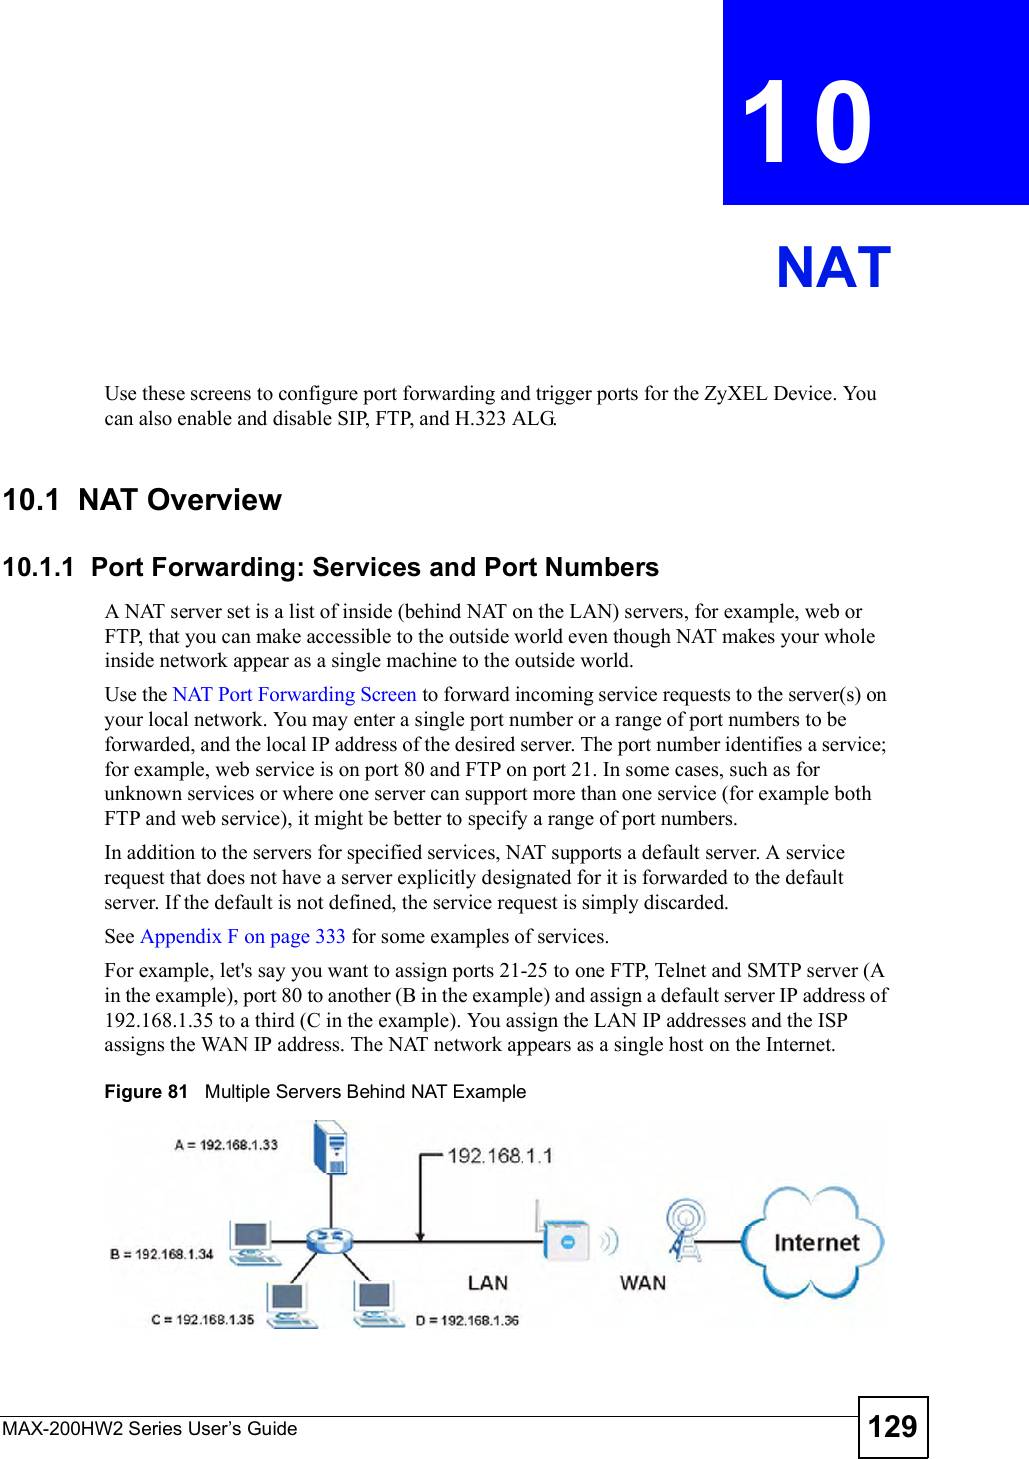 MAX-200HW2 Series User s Guide 129CHAPTER 10NATUse these screens to configure port forwarding and trigger ports for the ZyXEL Device. You can also enable and disable SIP, FTP, and H.323 ALG.10.1  NAT Overview10.1.1  Port Forwarding: Services and Port NumbersA NAT server set is a list of inside (behind NAT on the LAN) servers, for example, web or FTP, that you can make accessible to the outside world even though NAT makes your whole inside network appear as a single machine to the outside world.Use the NAT Port Forwarding Screen to forward incoming service requests to the server(s) on your local network. You may enter a single port number or a range of port numbers to be forwarded, and the local IP address of the desired server. The port number identifies a service; for example, web service is on port 80 and FTP on port 21. In some cases, such as for unknown services or where one server can support more than one service (for example both FTP and web service), it might be better to specify a range of port numbers. In addition to the servers for specified services, NAT supports a default server. A service request that does not have a server explicitly designated for it is forwarded to the default server. If the default is not defined, the service request is simply discarded.See Appendix F on page 333 for some examples of services.For example, let&apos;s say you want to assign ports 21-25 to one FTP, Telnet and SMTP server (A in the example), port 80 to another (B in the example) and assign a default server IP address of 192.168.1.35 to a third (C in the example). You assign the LAN IP addresses and the ISP assigns the WAN IP address. The NAT network appears as a single host on the Internet.Figure 81   Multiple Servers Behind NAT Example